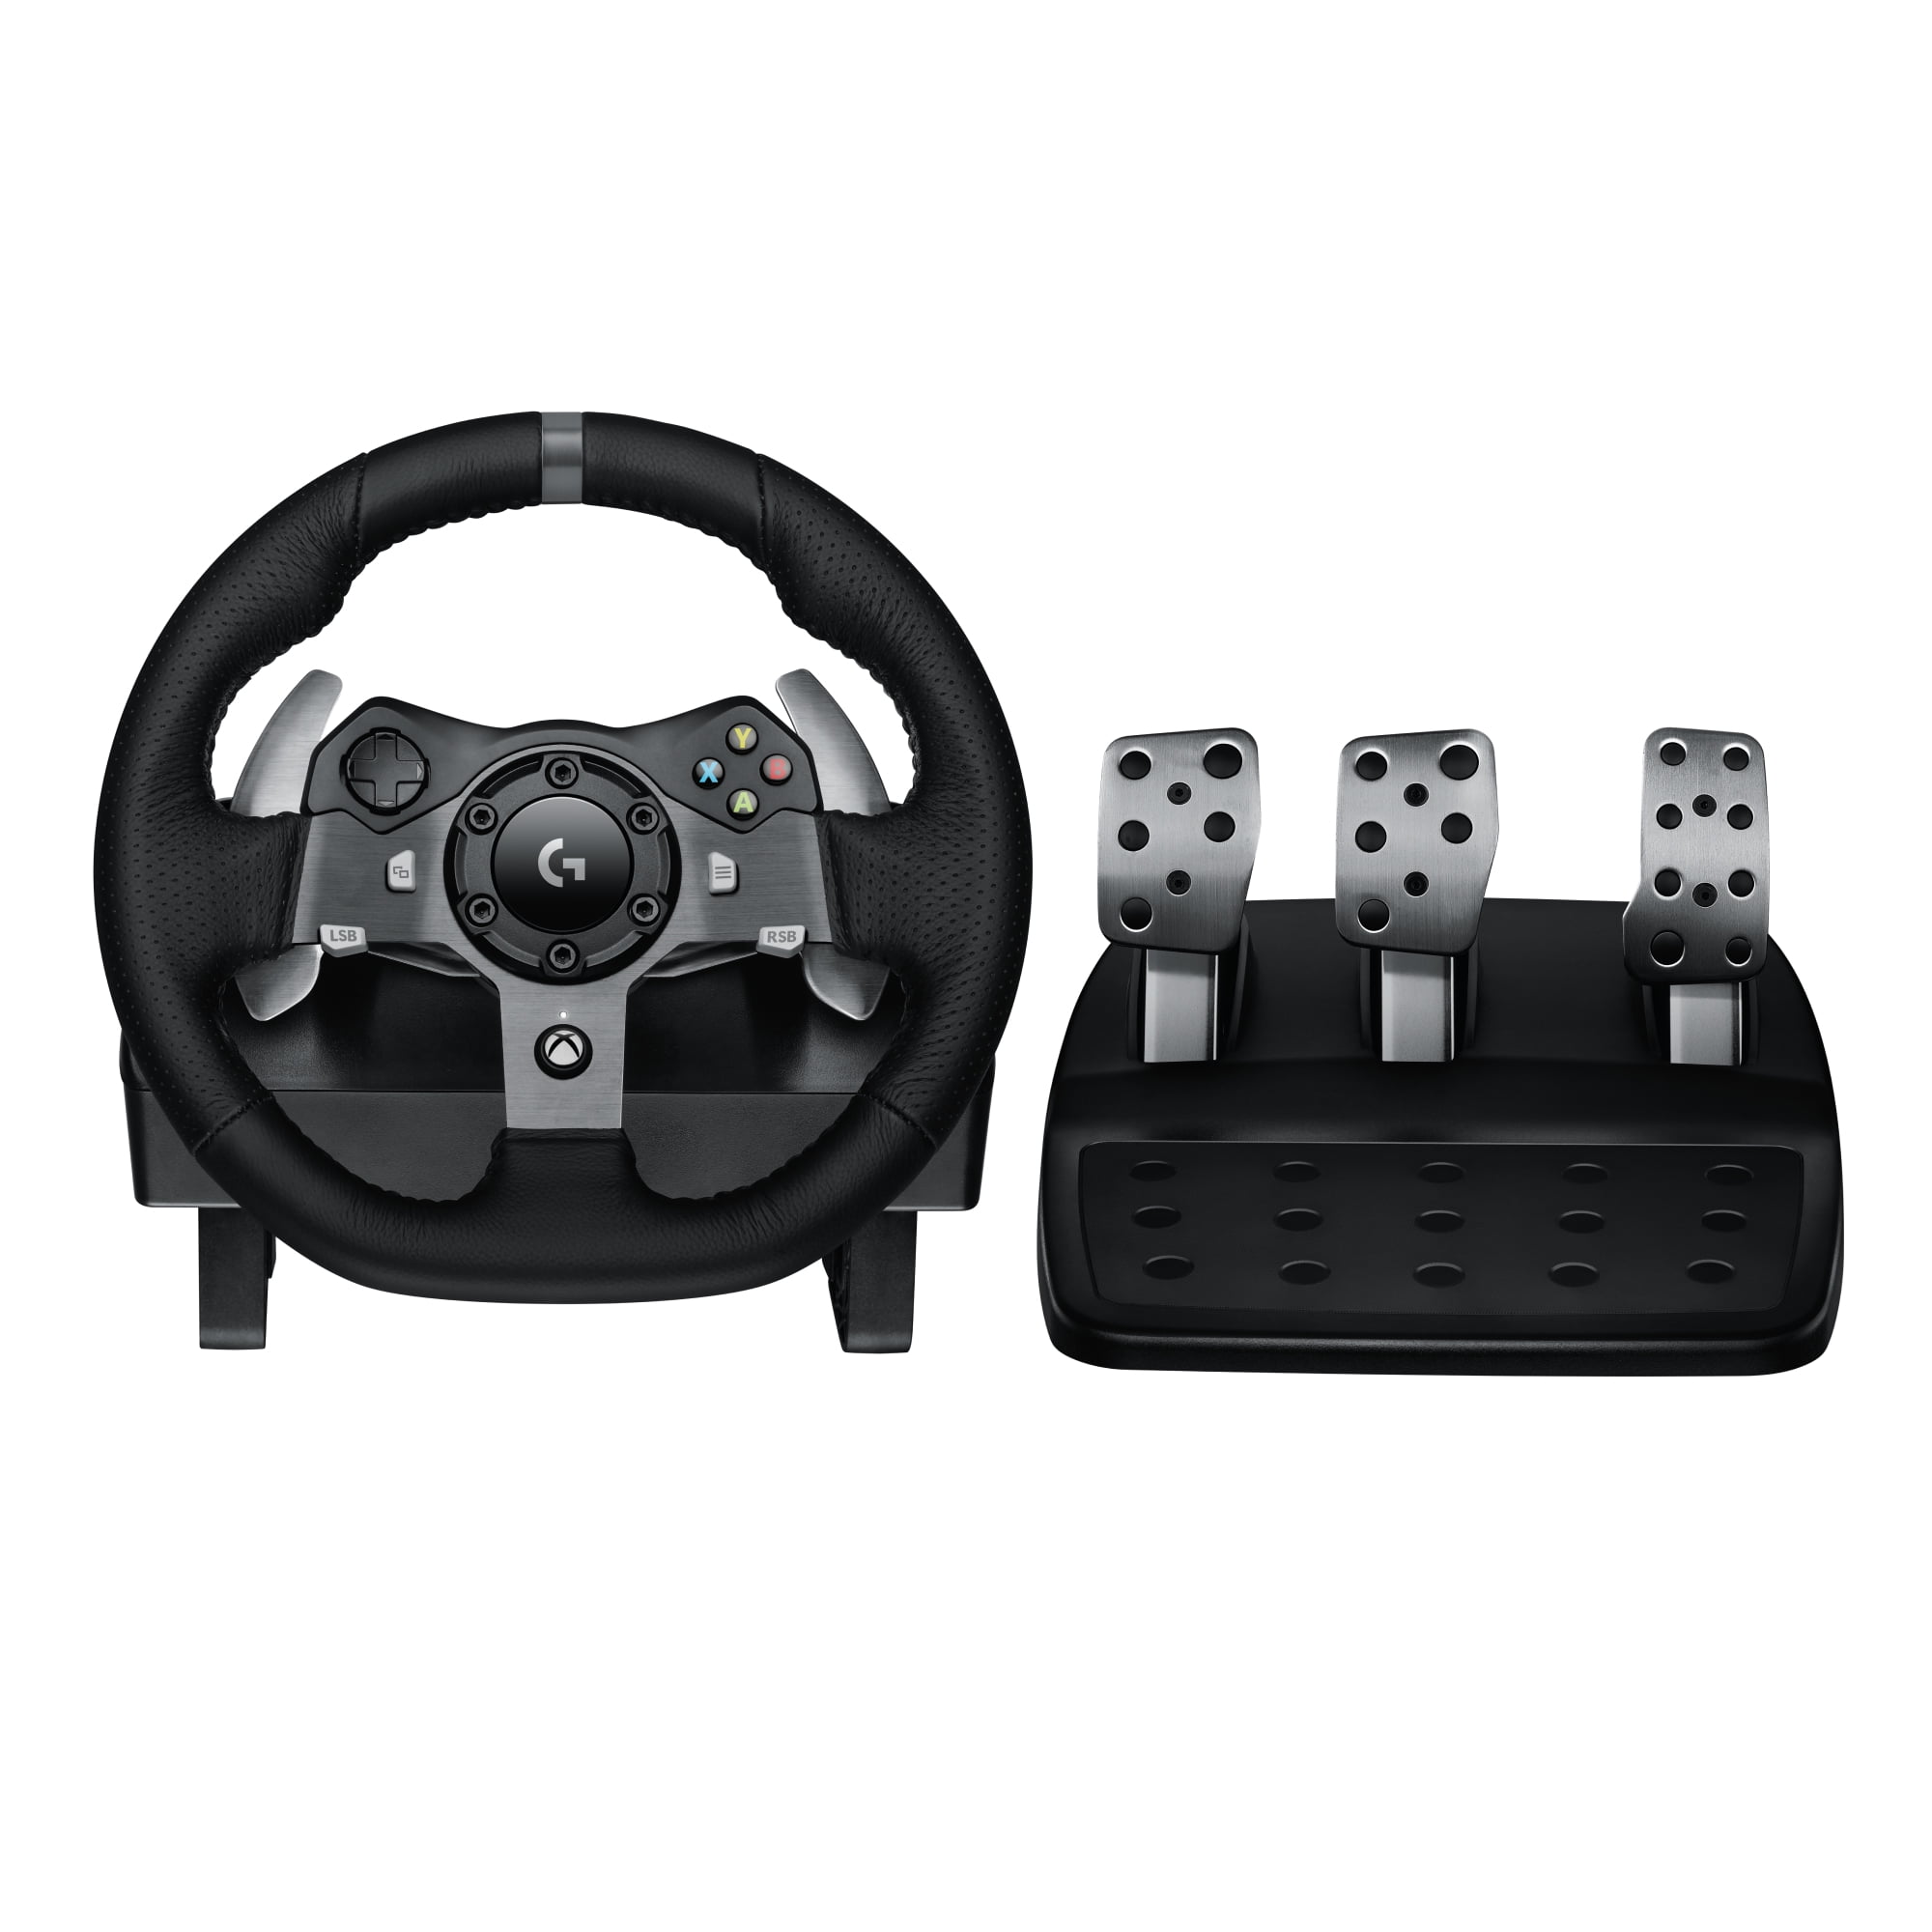 Kristendom glide beholder Logitech G920 Driving Force Racing Wheel and Floor Pedals for Xbox Series  X|S, Xbox One, PC, Mac, Black - Walmart.com